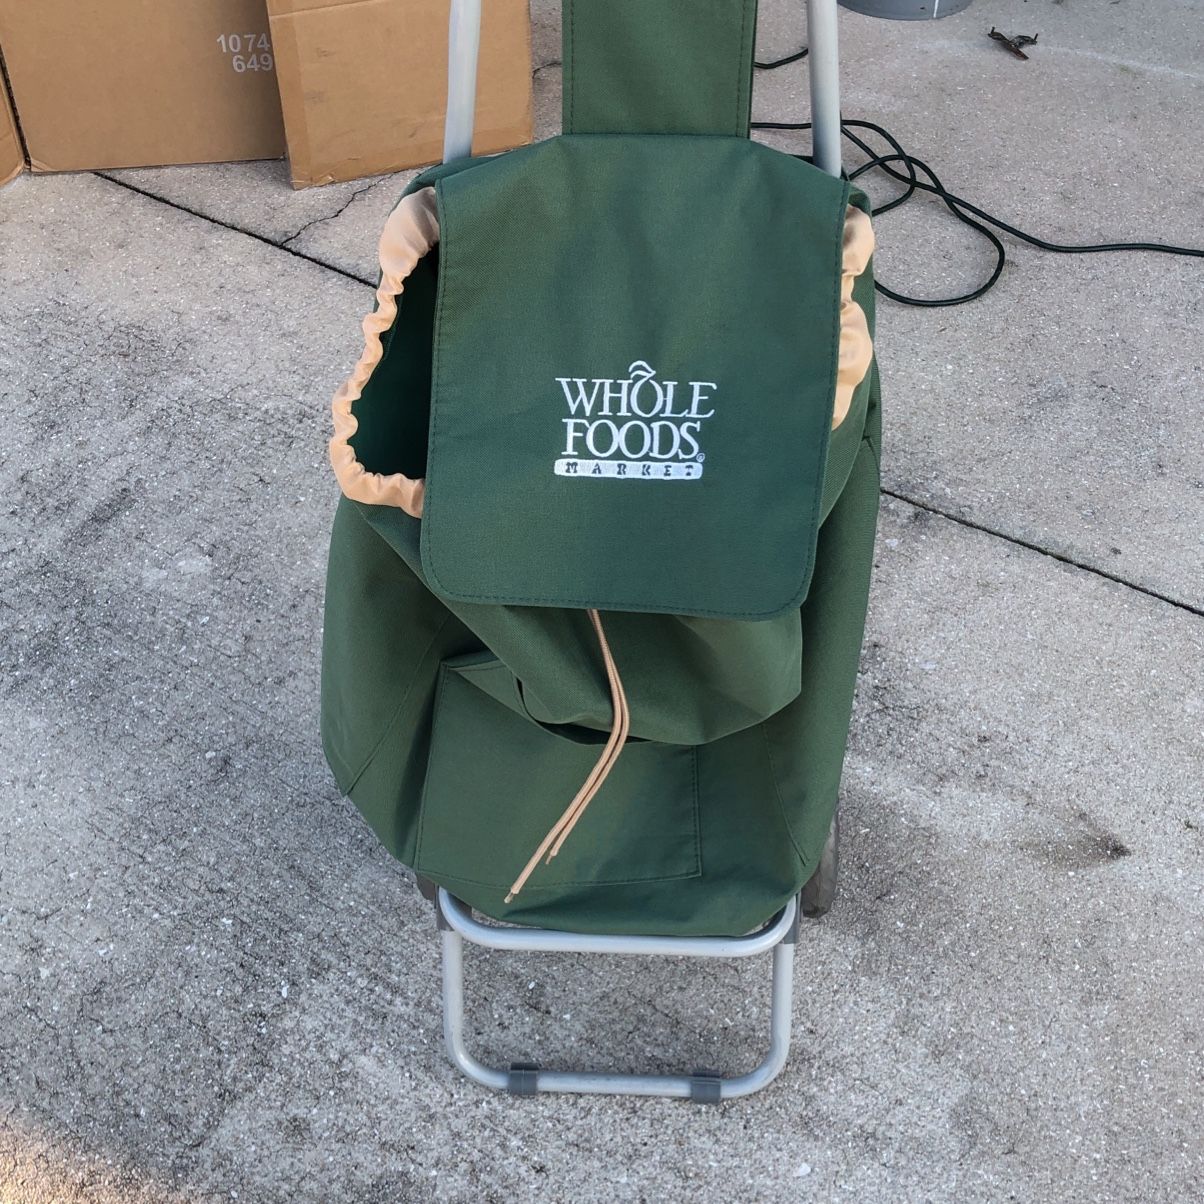 Whole Foods Market Trolly Dolly Cart